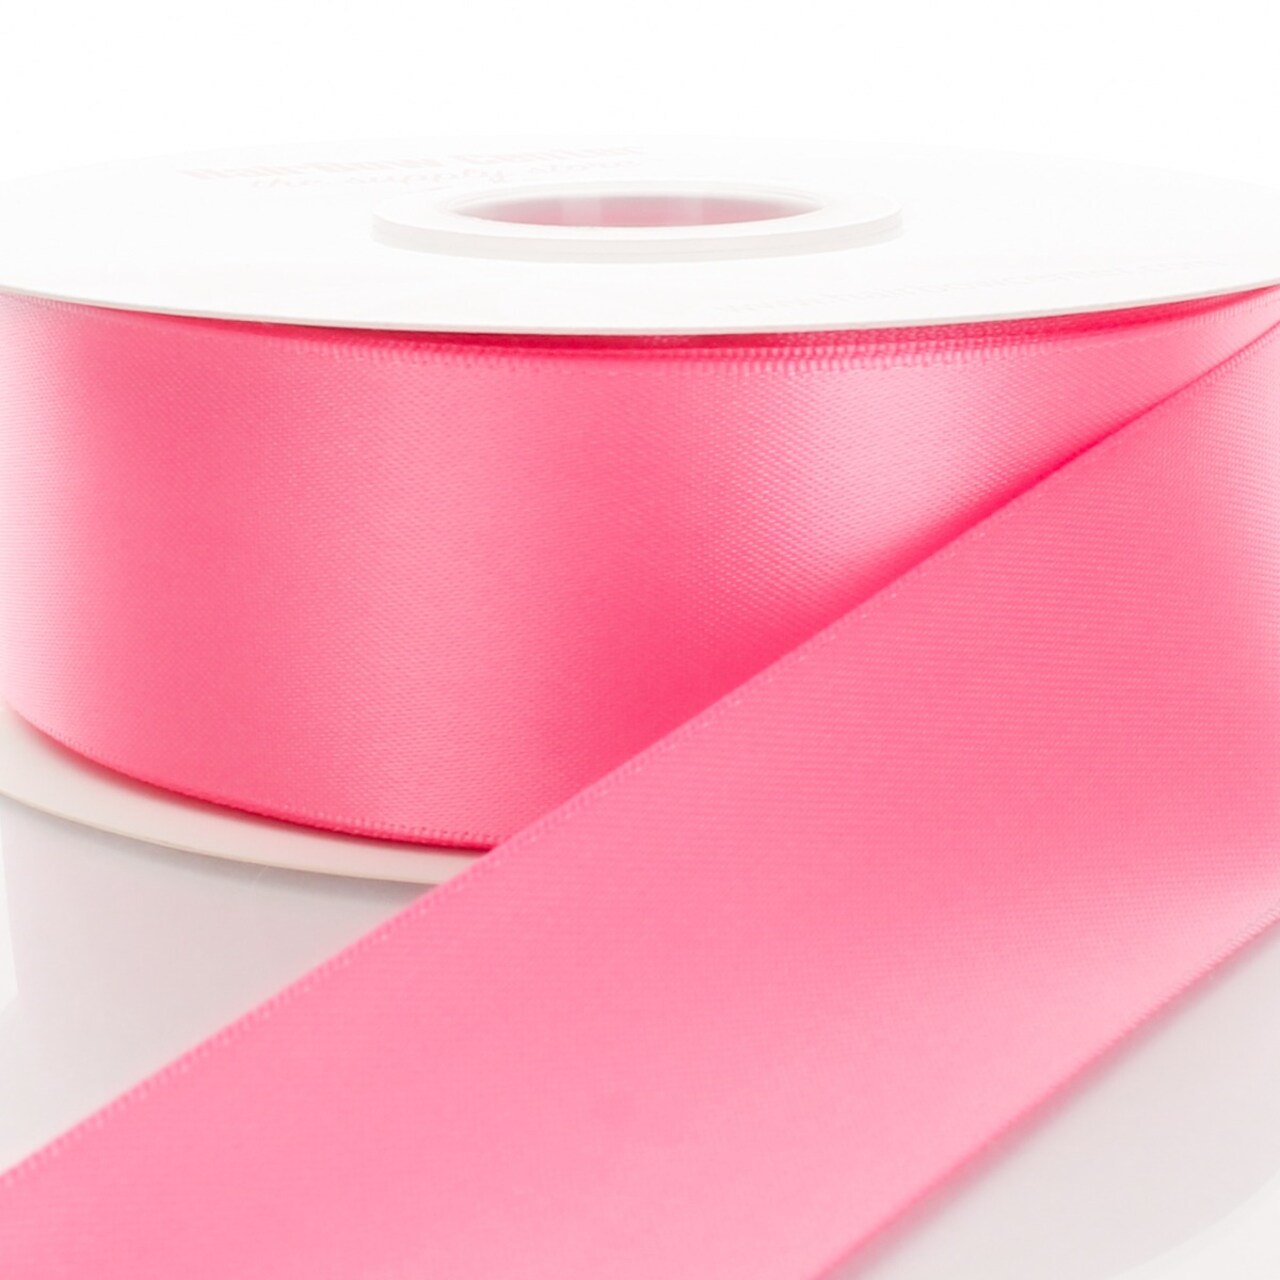 2.25 Double Faced Satin Ribbon 156 Hot Pink 25yd